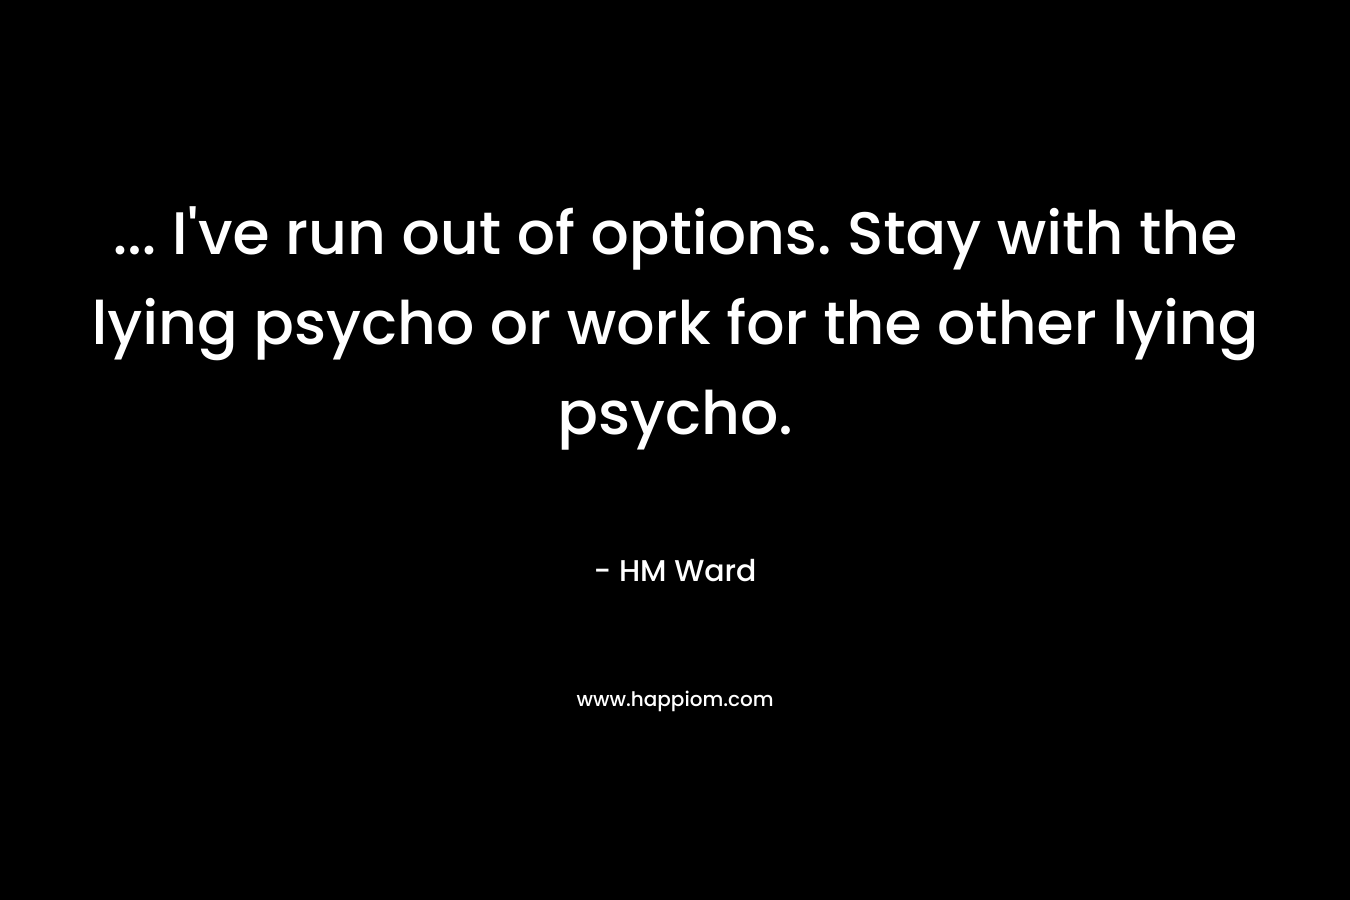 … I’ve run out of options. Stay with the lying psycho or work for the other lying psycho. – HM Ward